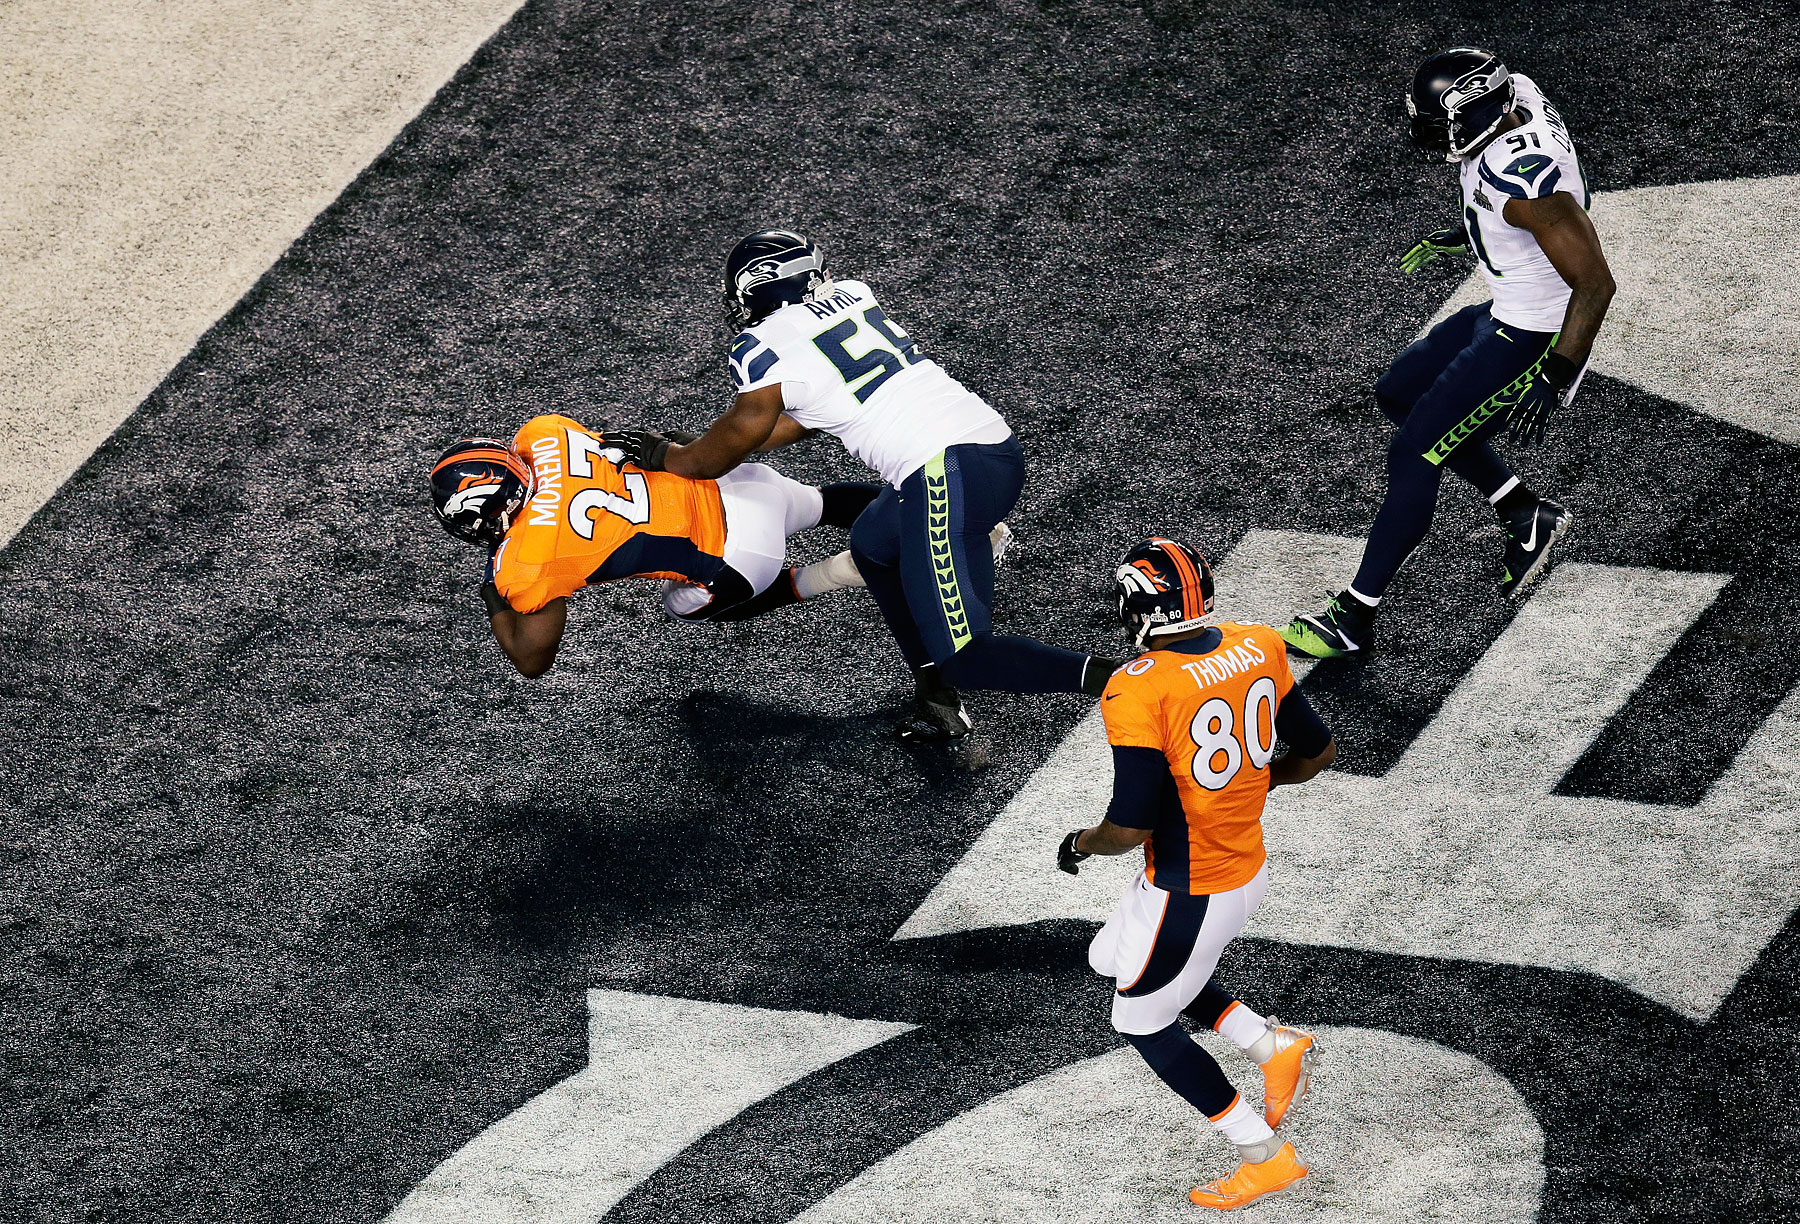 Running back Knowshon Moreno of the Denver Broncos recovers the ball in the endzone for a safety against the Seattle Seahawks during the first quarter.